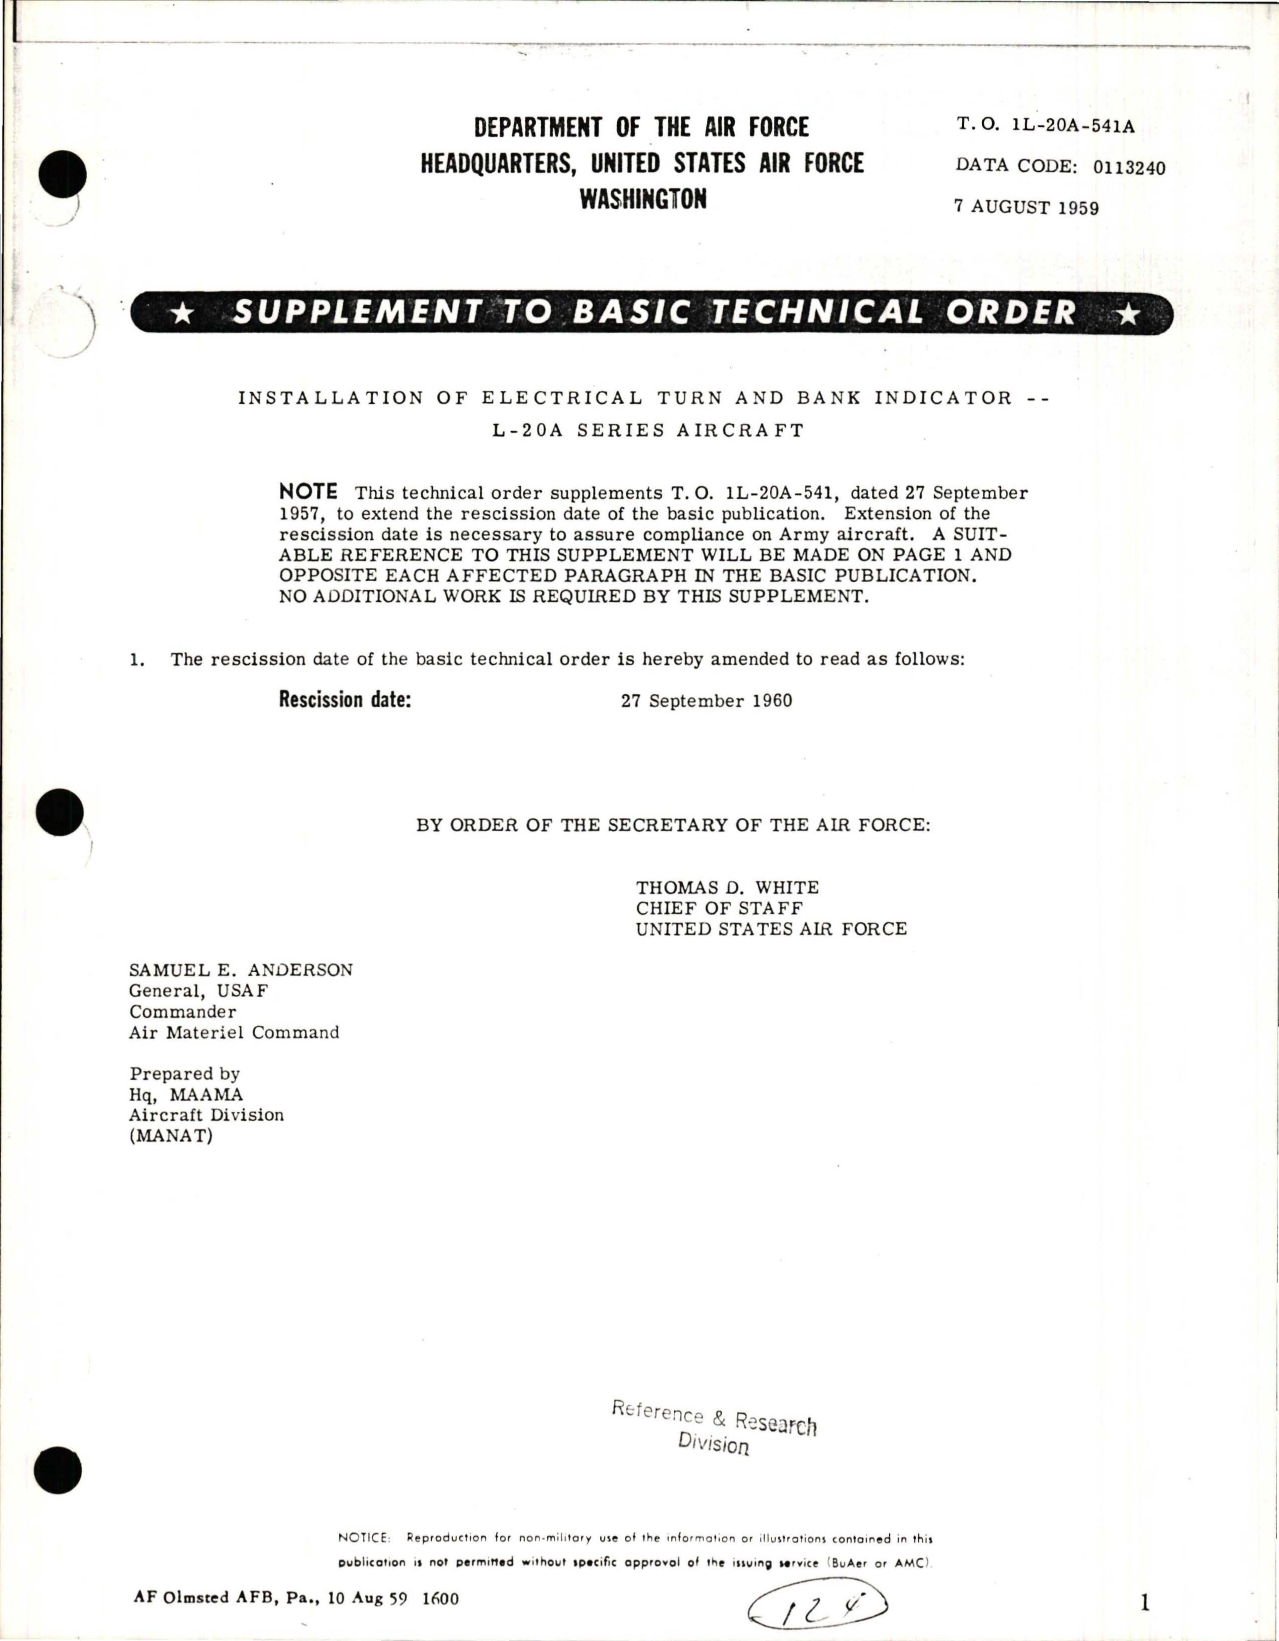 Sample page 1 from AirCorps Library document: Supplement to Installation of Electrical Turn and Bank Indicator - L-20A Series